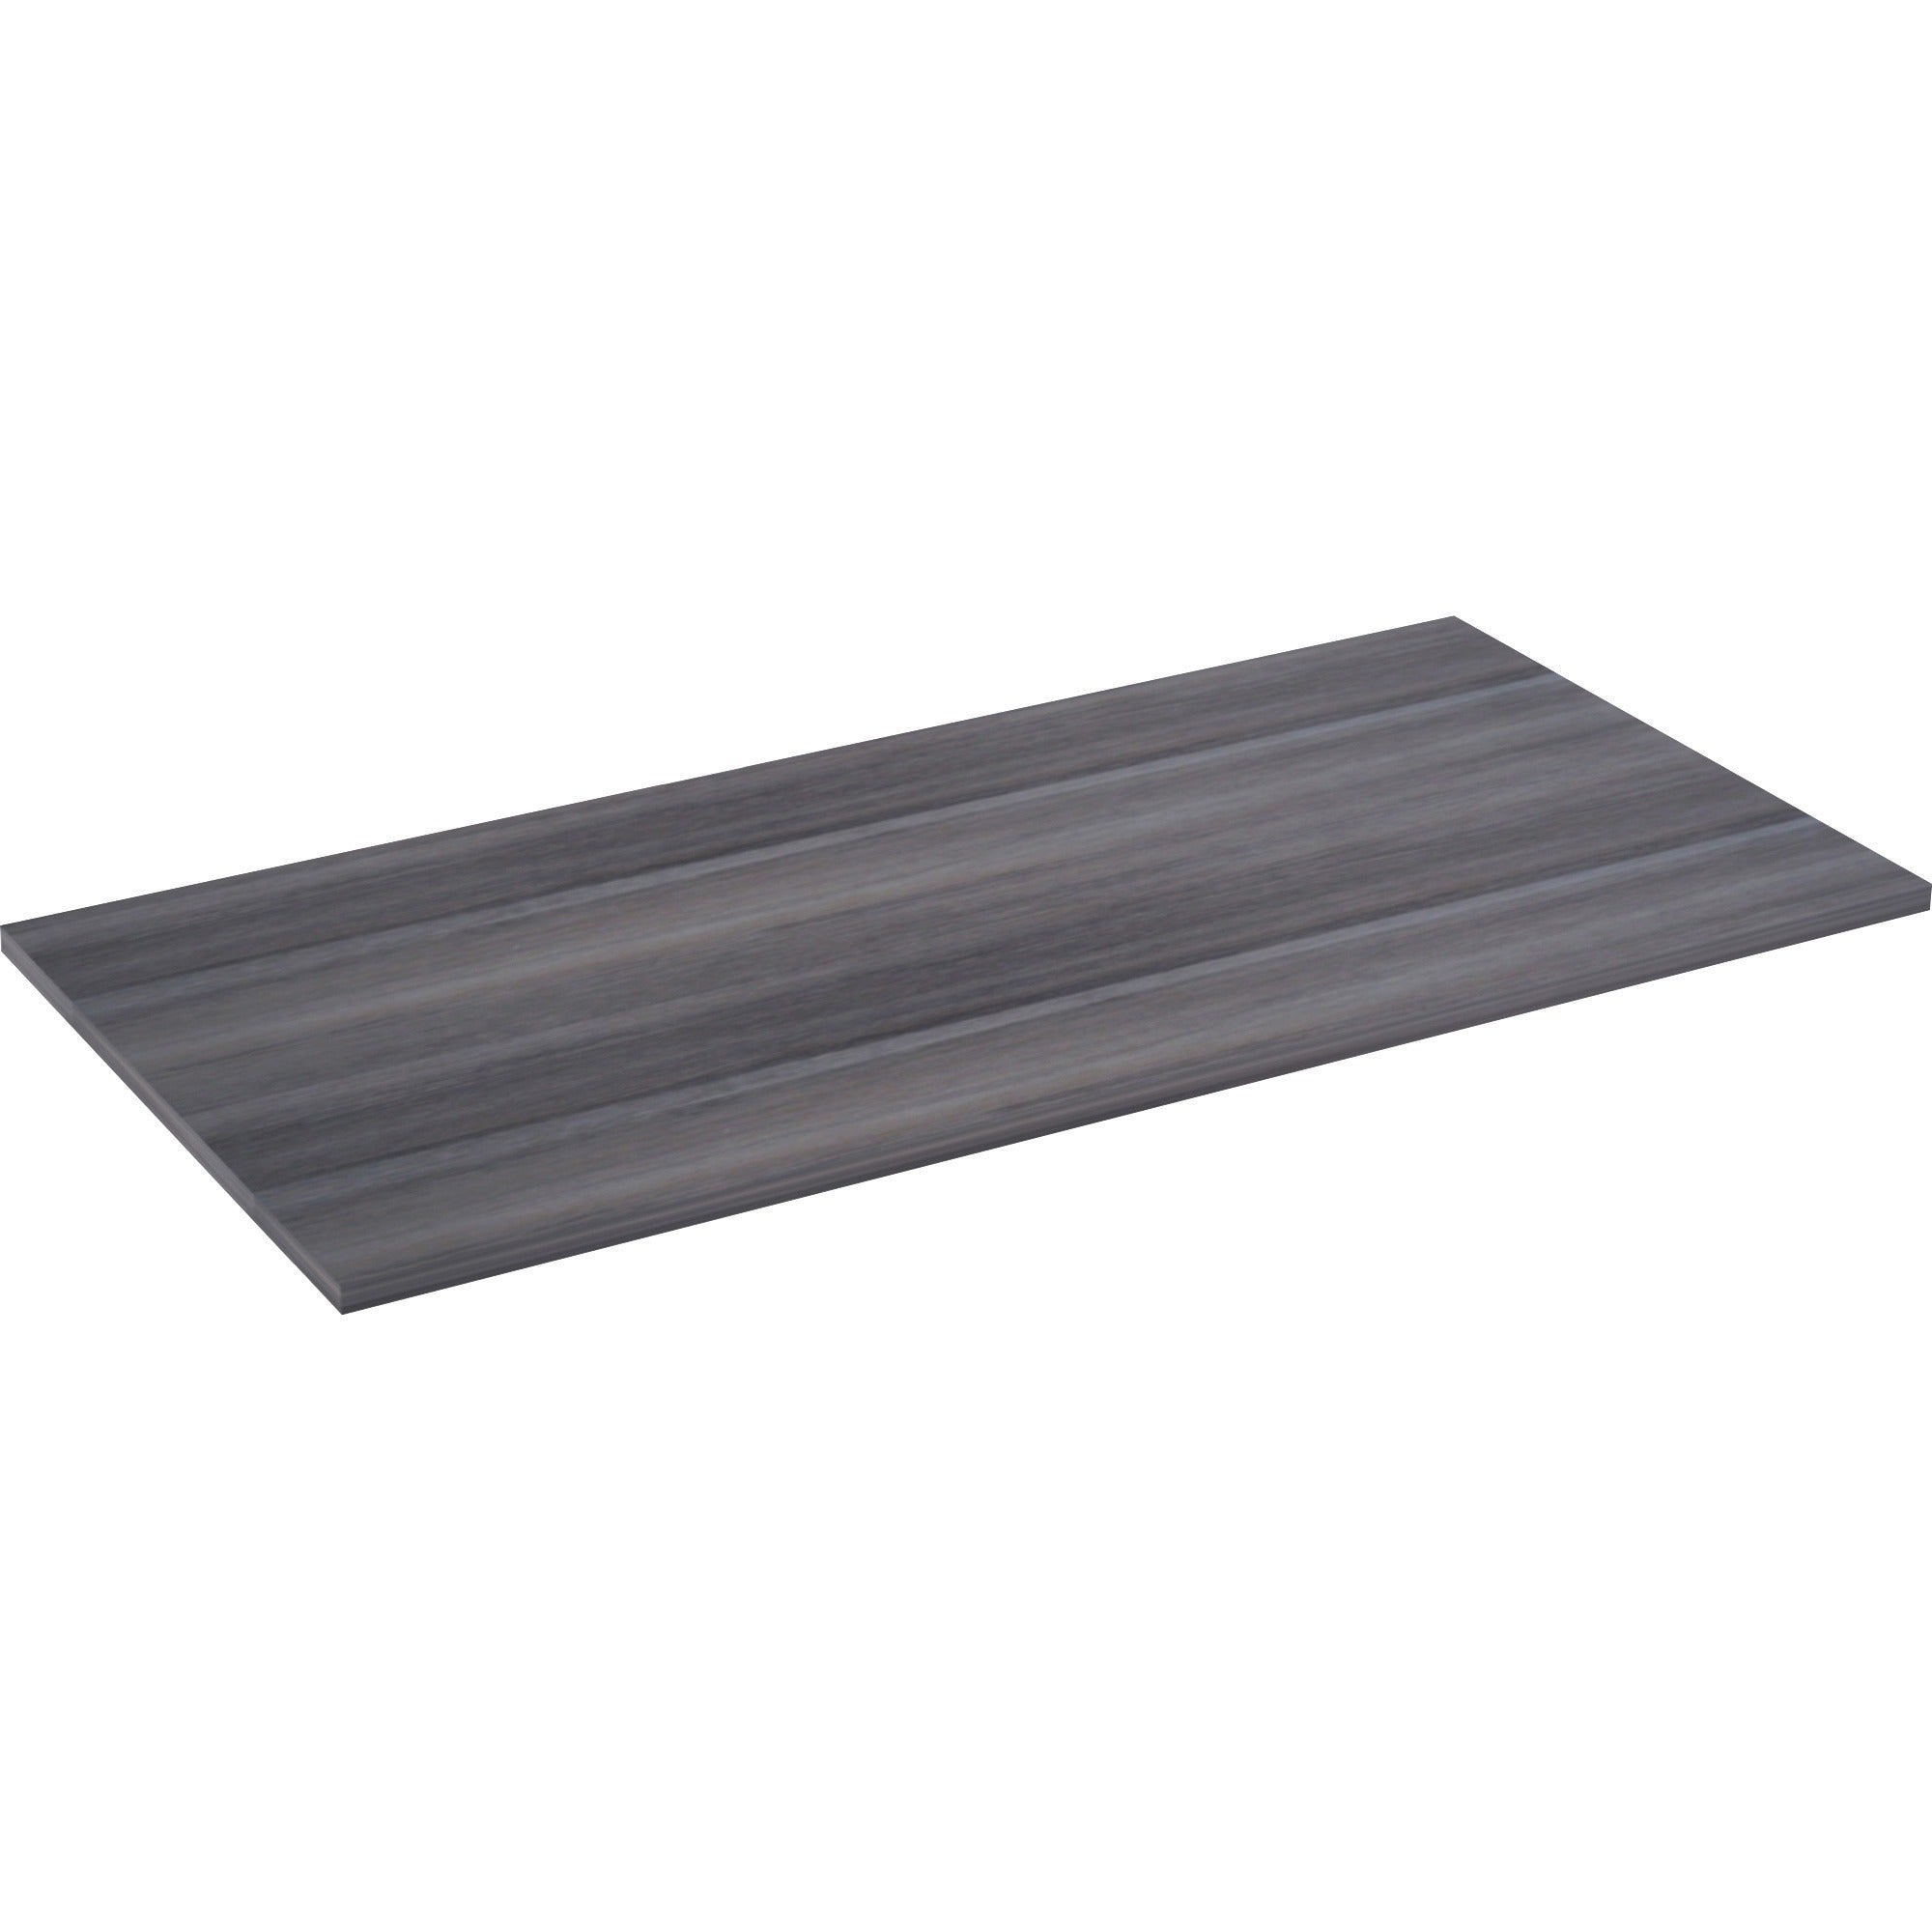 lorell-relevance-series-charcoal-laminate-office-furniture-60-x-30-table-top-straight-edge-material-polyvinyl-chloride-pvc-edge-finish-charcoal-laminate_llr16201 - 2